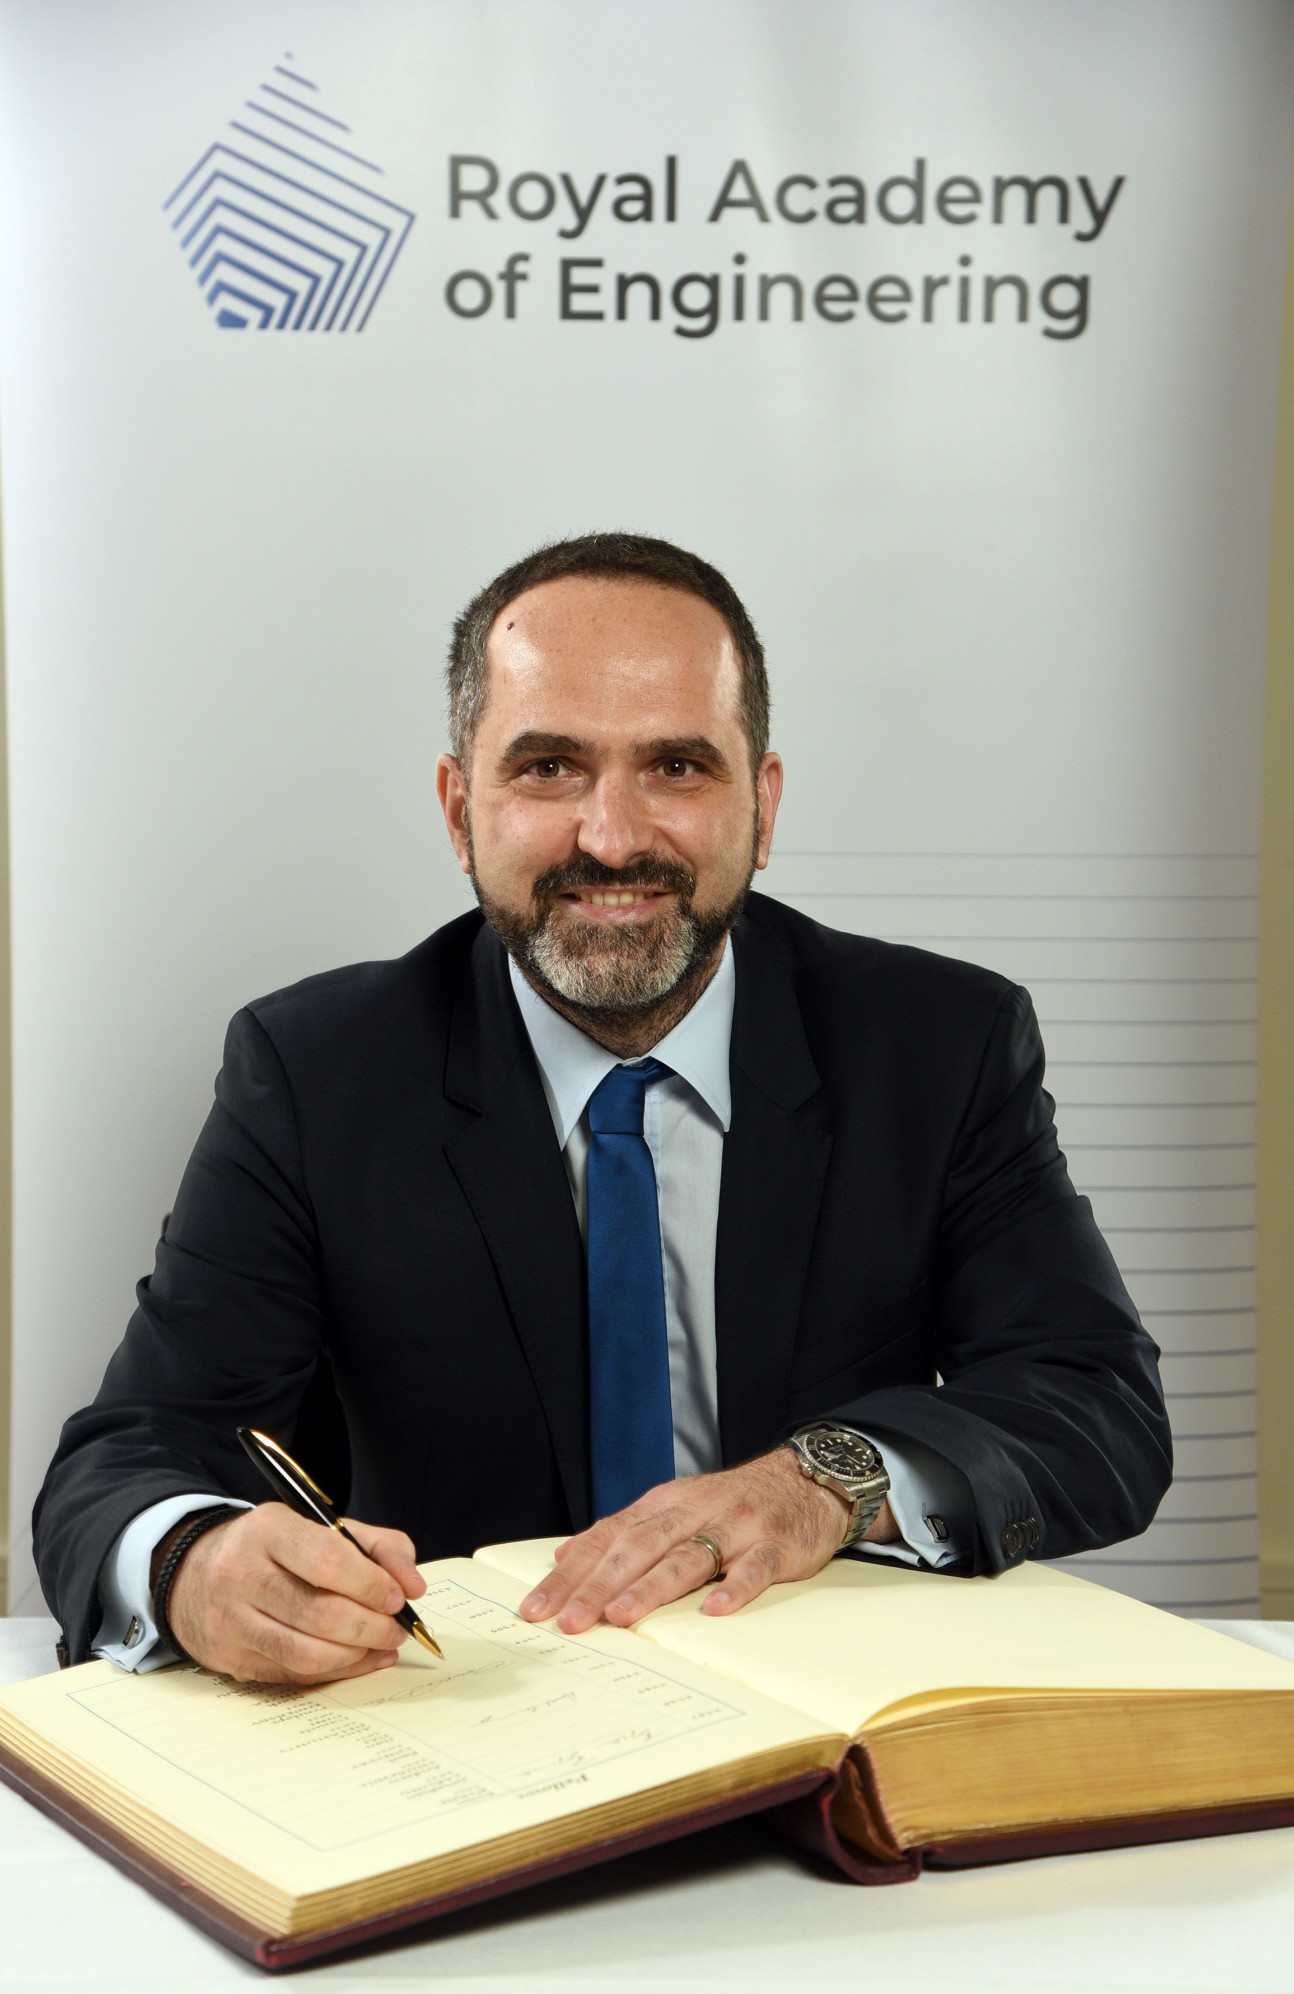 Professor Daniele Dini, from Imperial's Department of Mechanical Engineering